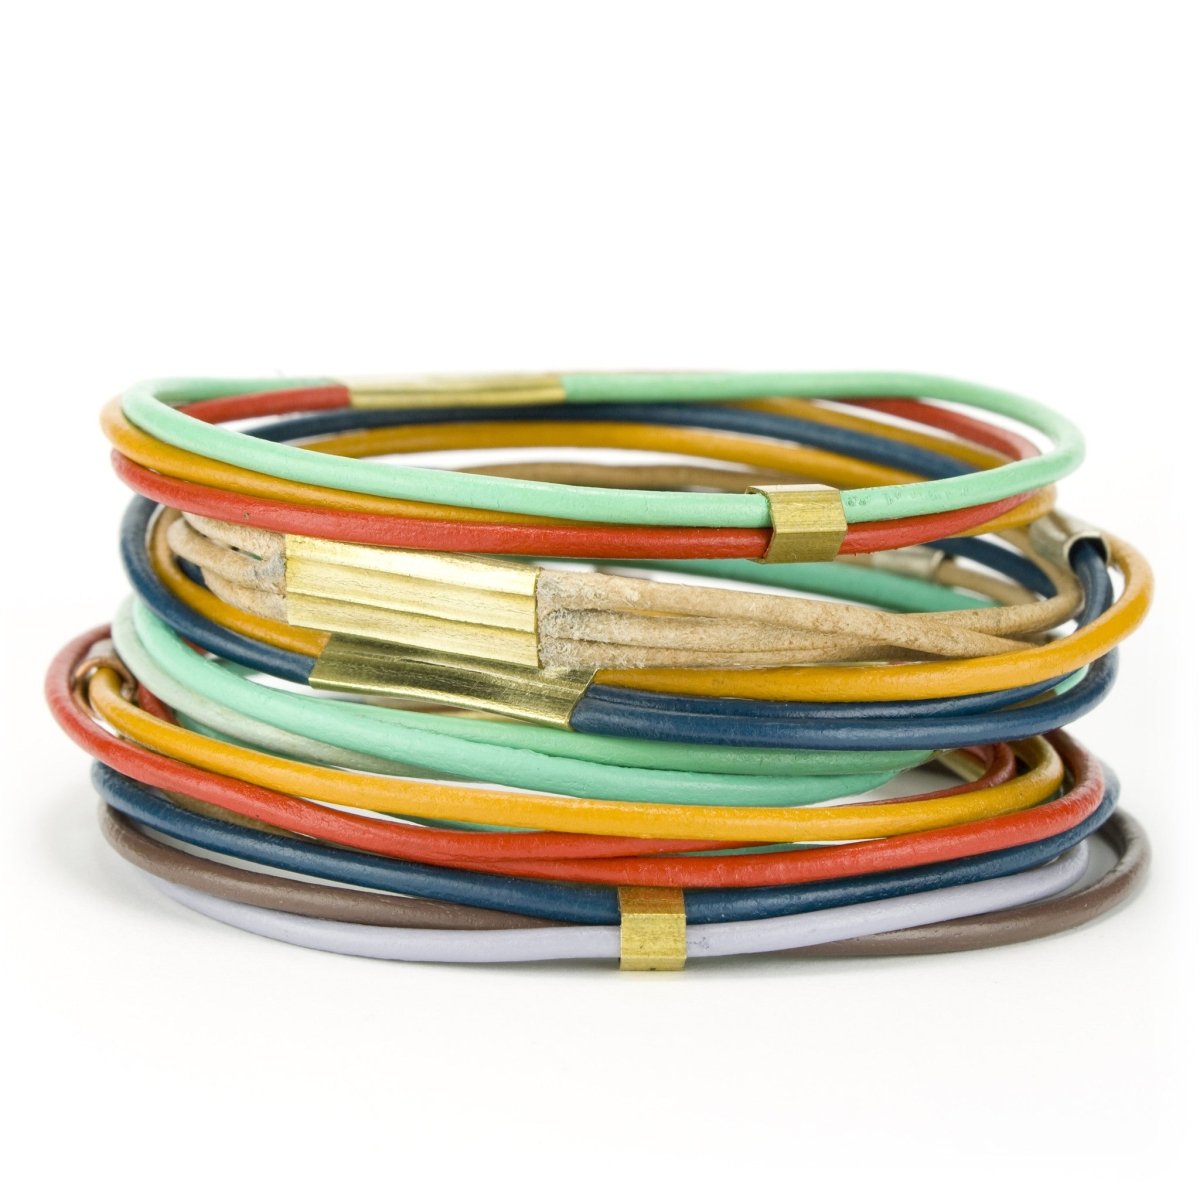 A large stack of all the different leather bangle bracelet colors betsy & iya offers.